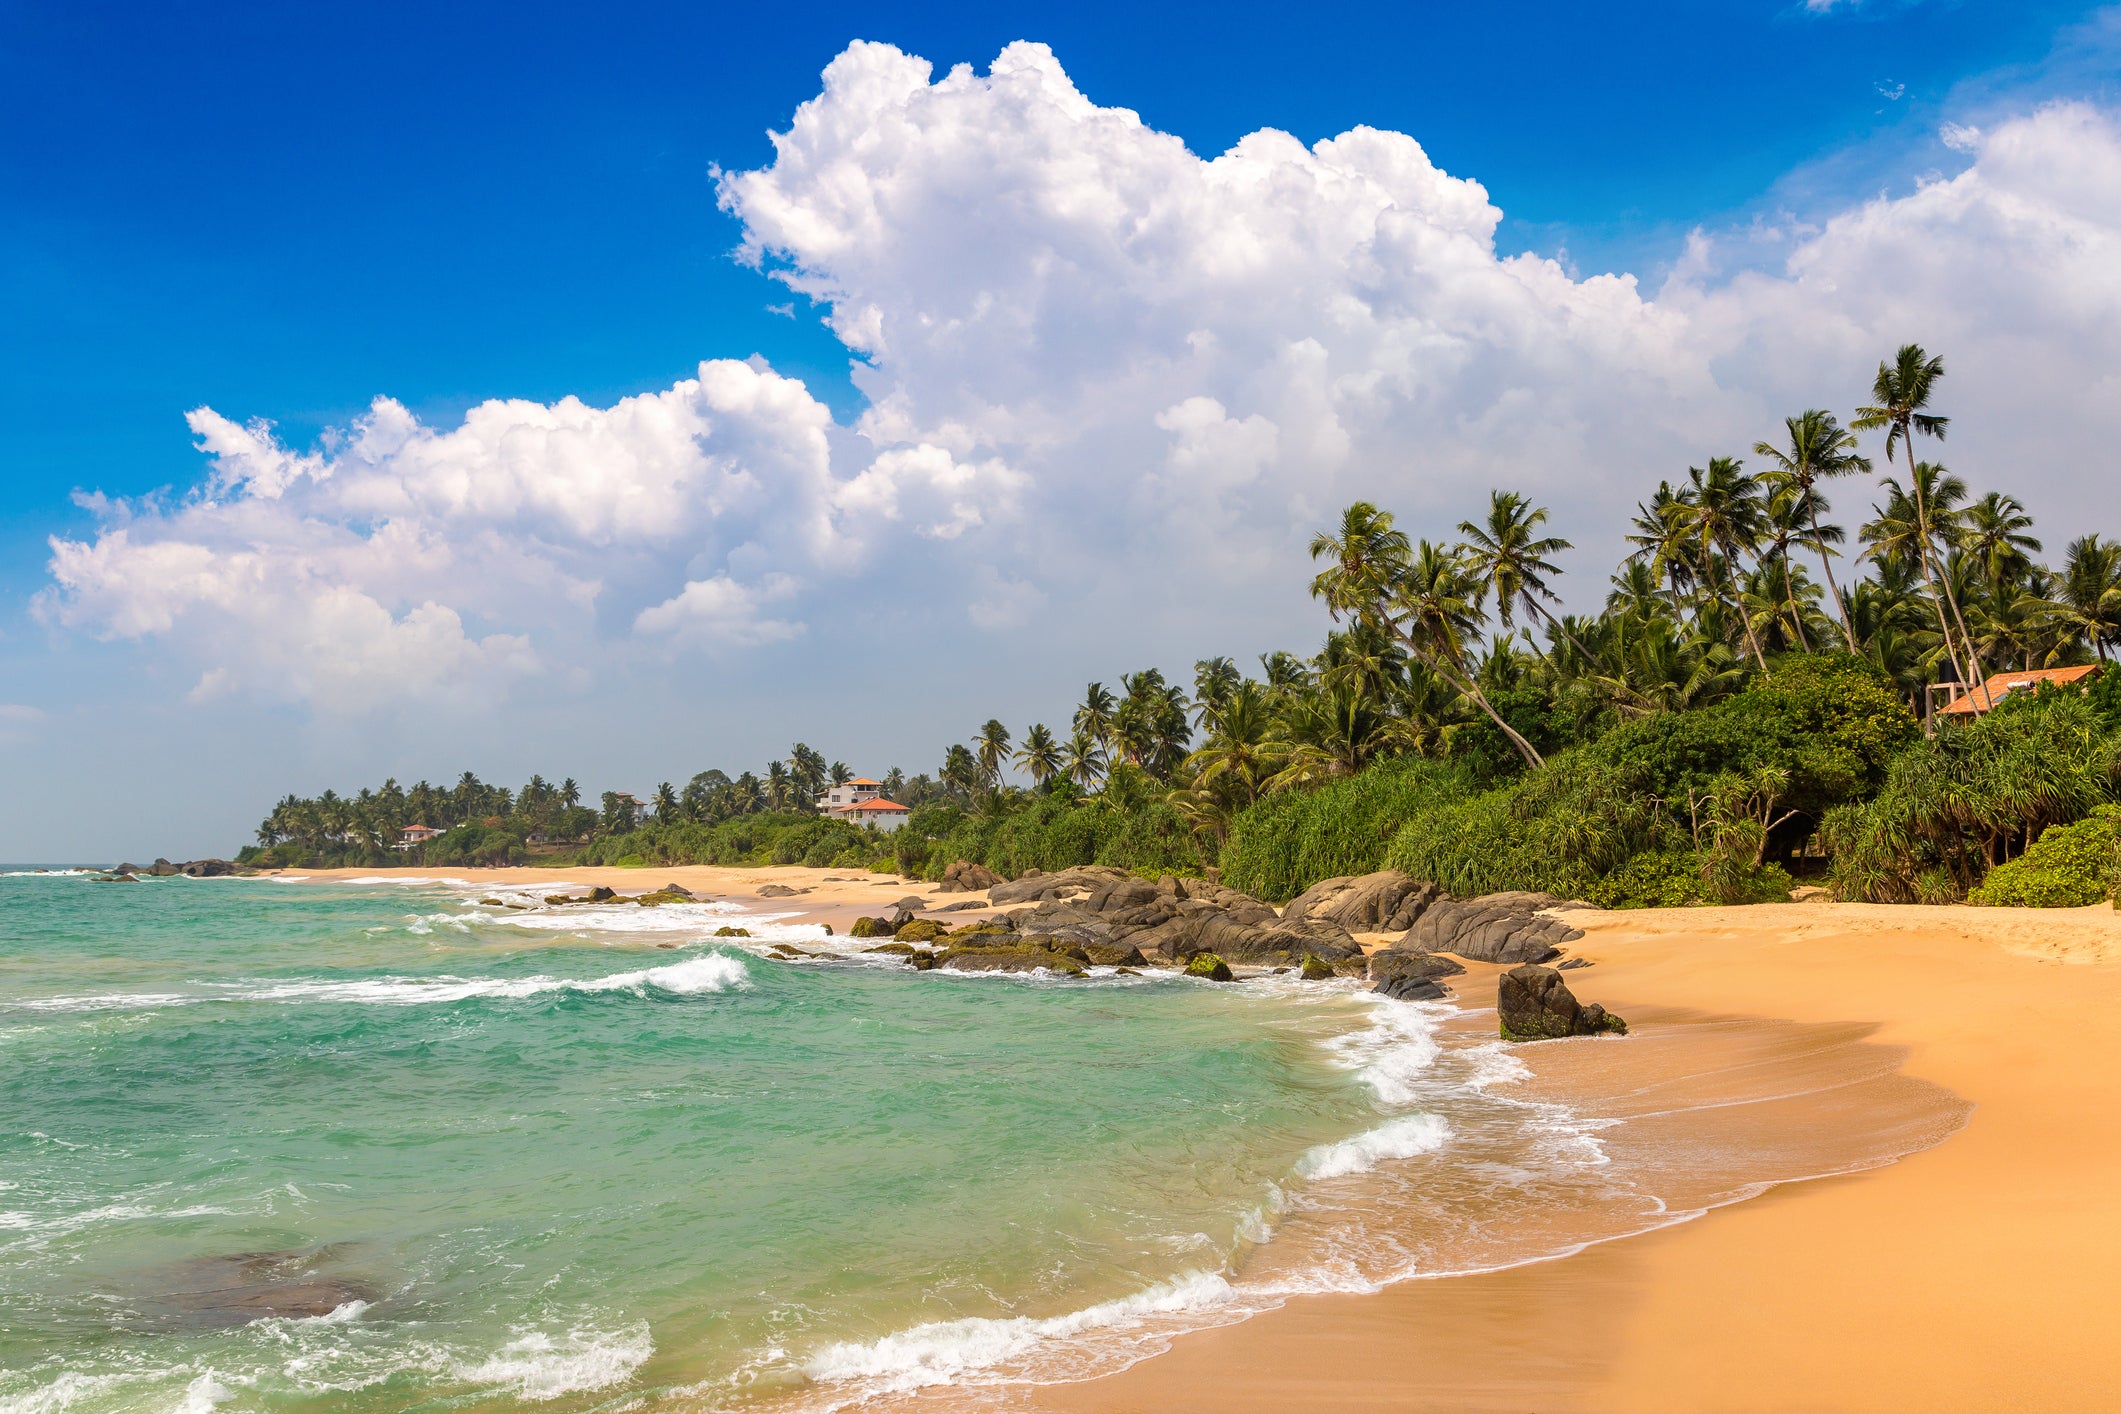 Sri Lanka is home to some of the world’s finest beaches